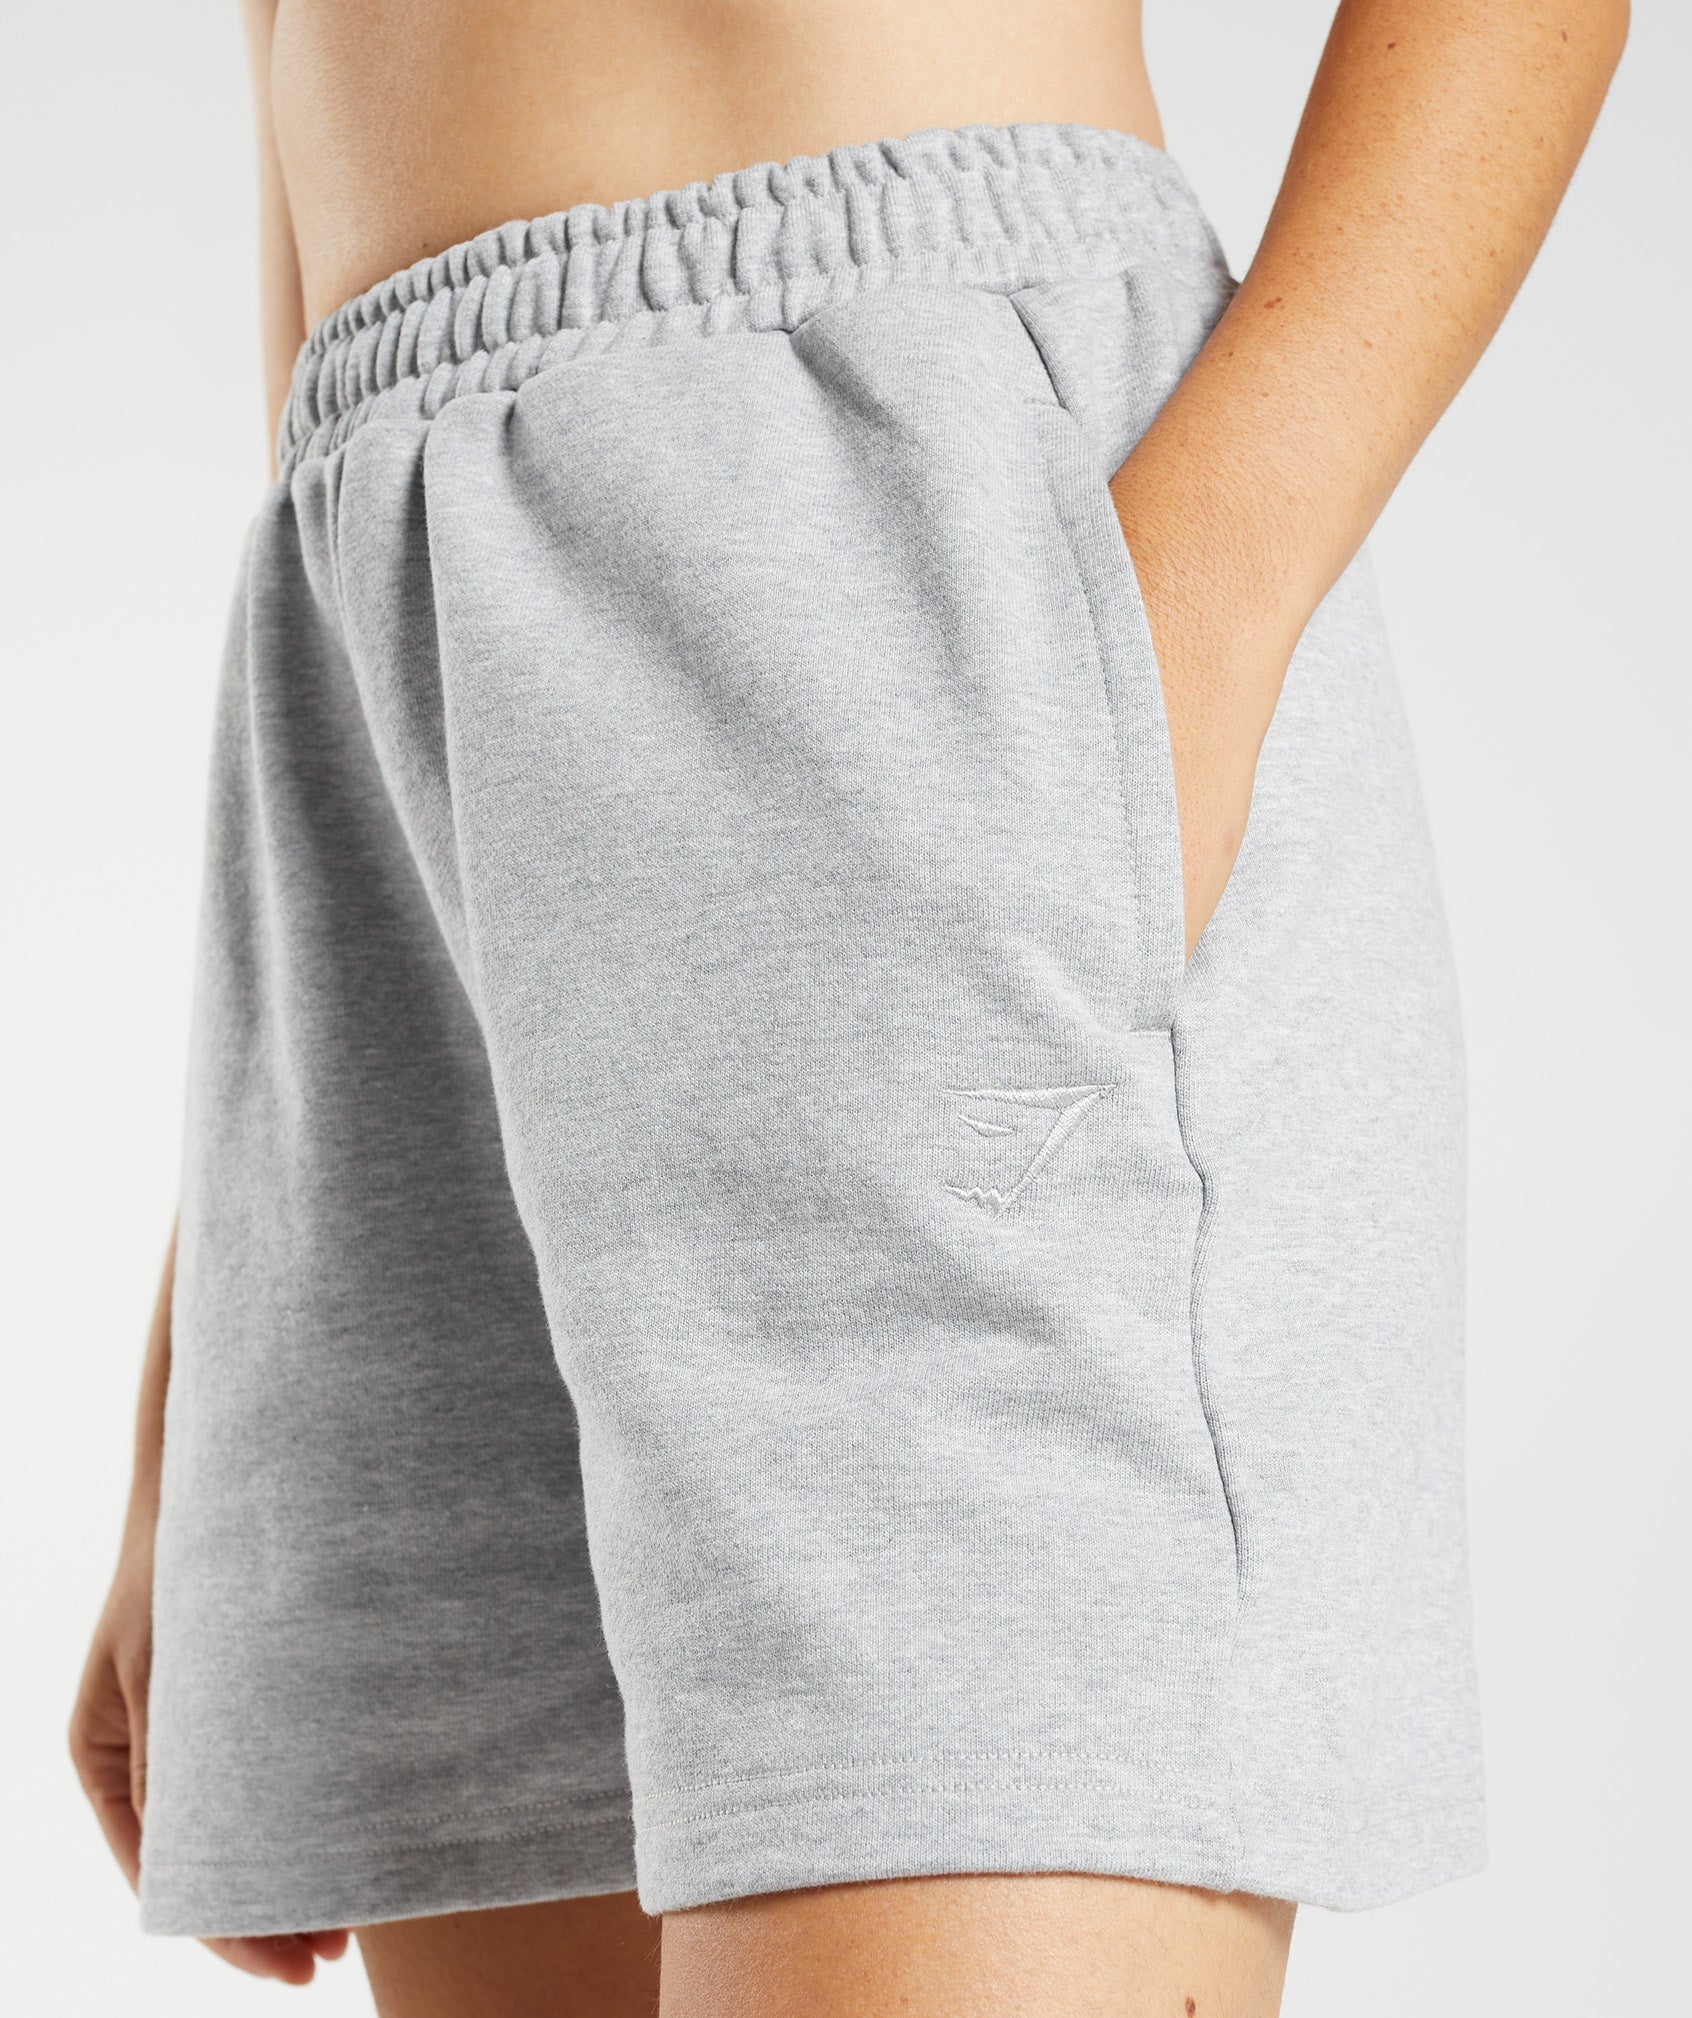 Rest Day Sweats Shorts in Light Grey Core Marl - view 5